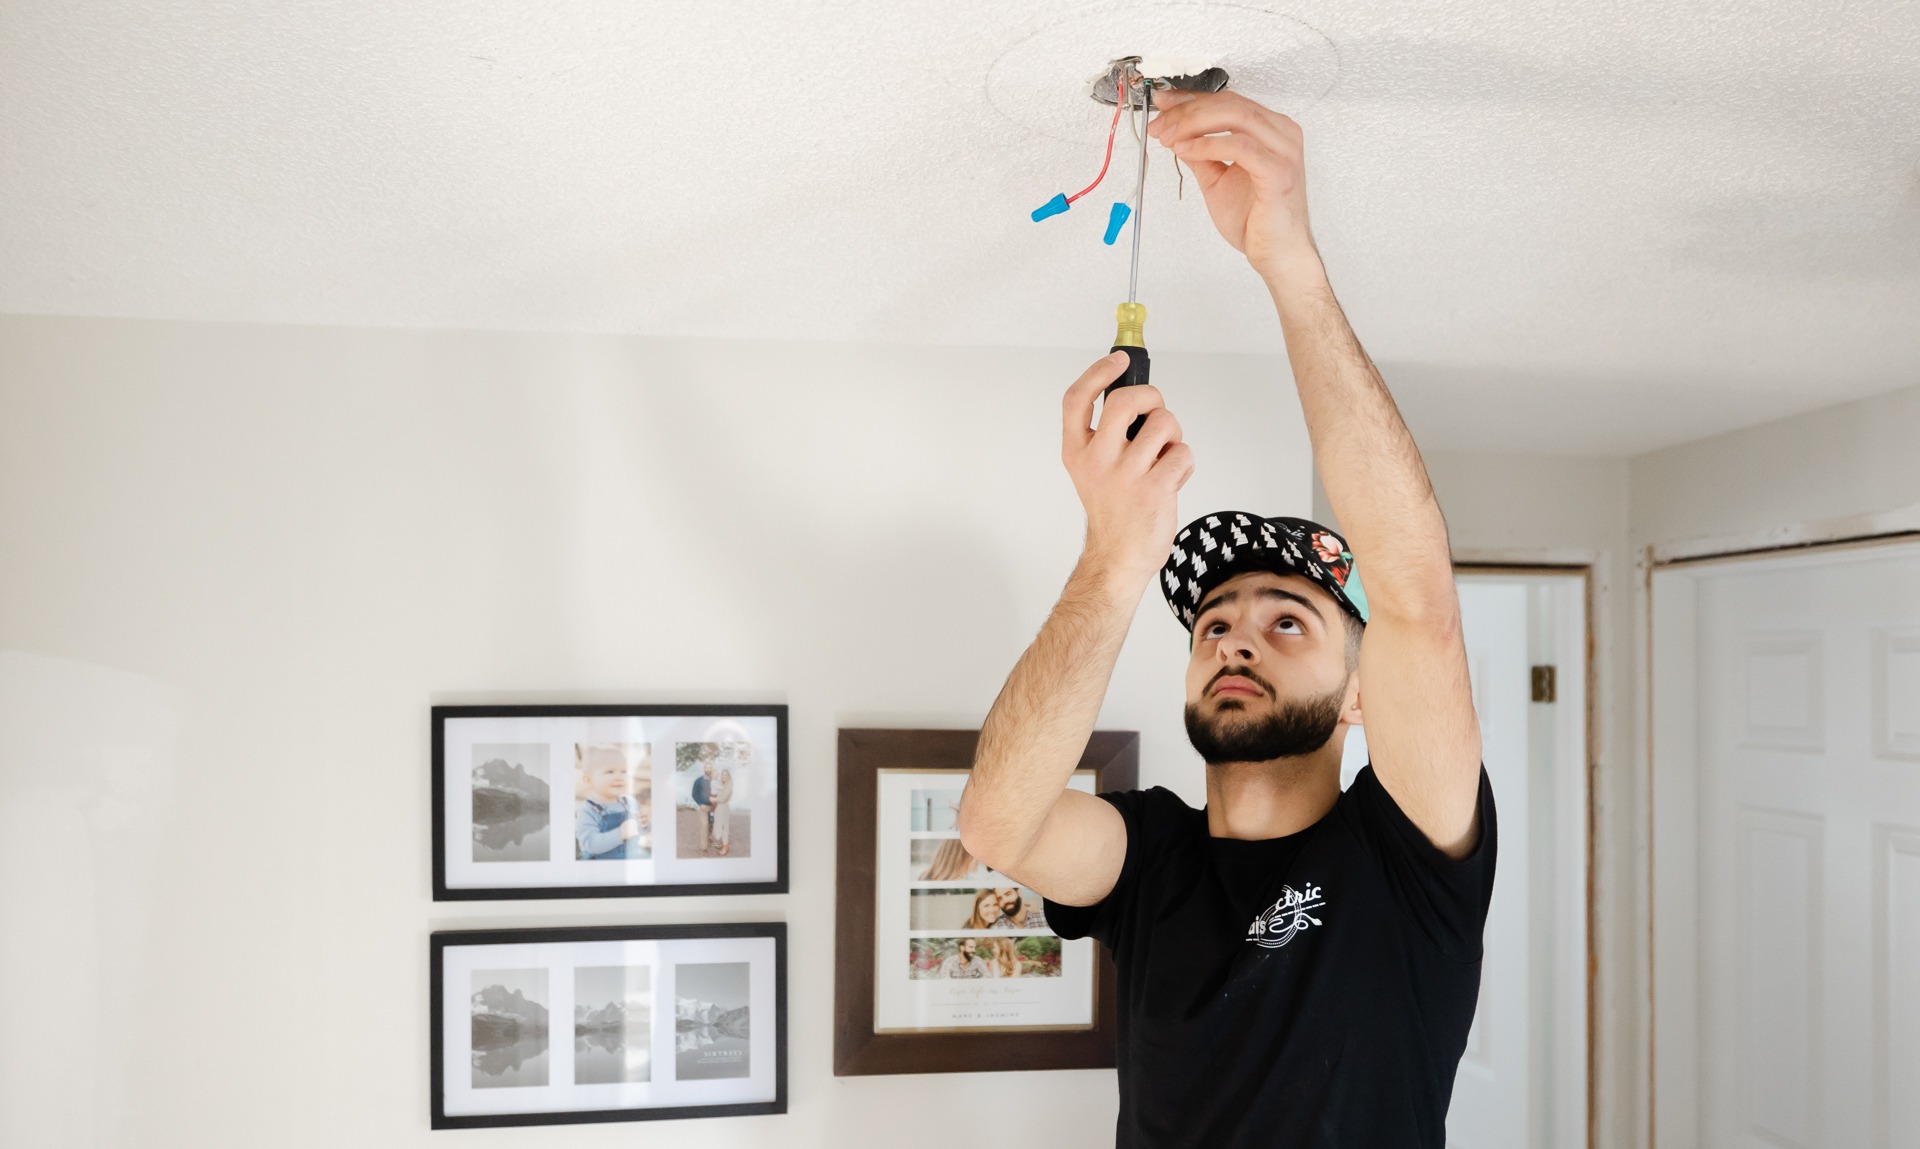 A person is installing or fixing a ceiling light, holding a screwdriver and looking at exposed wires. There are framed pictures on the wall.